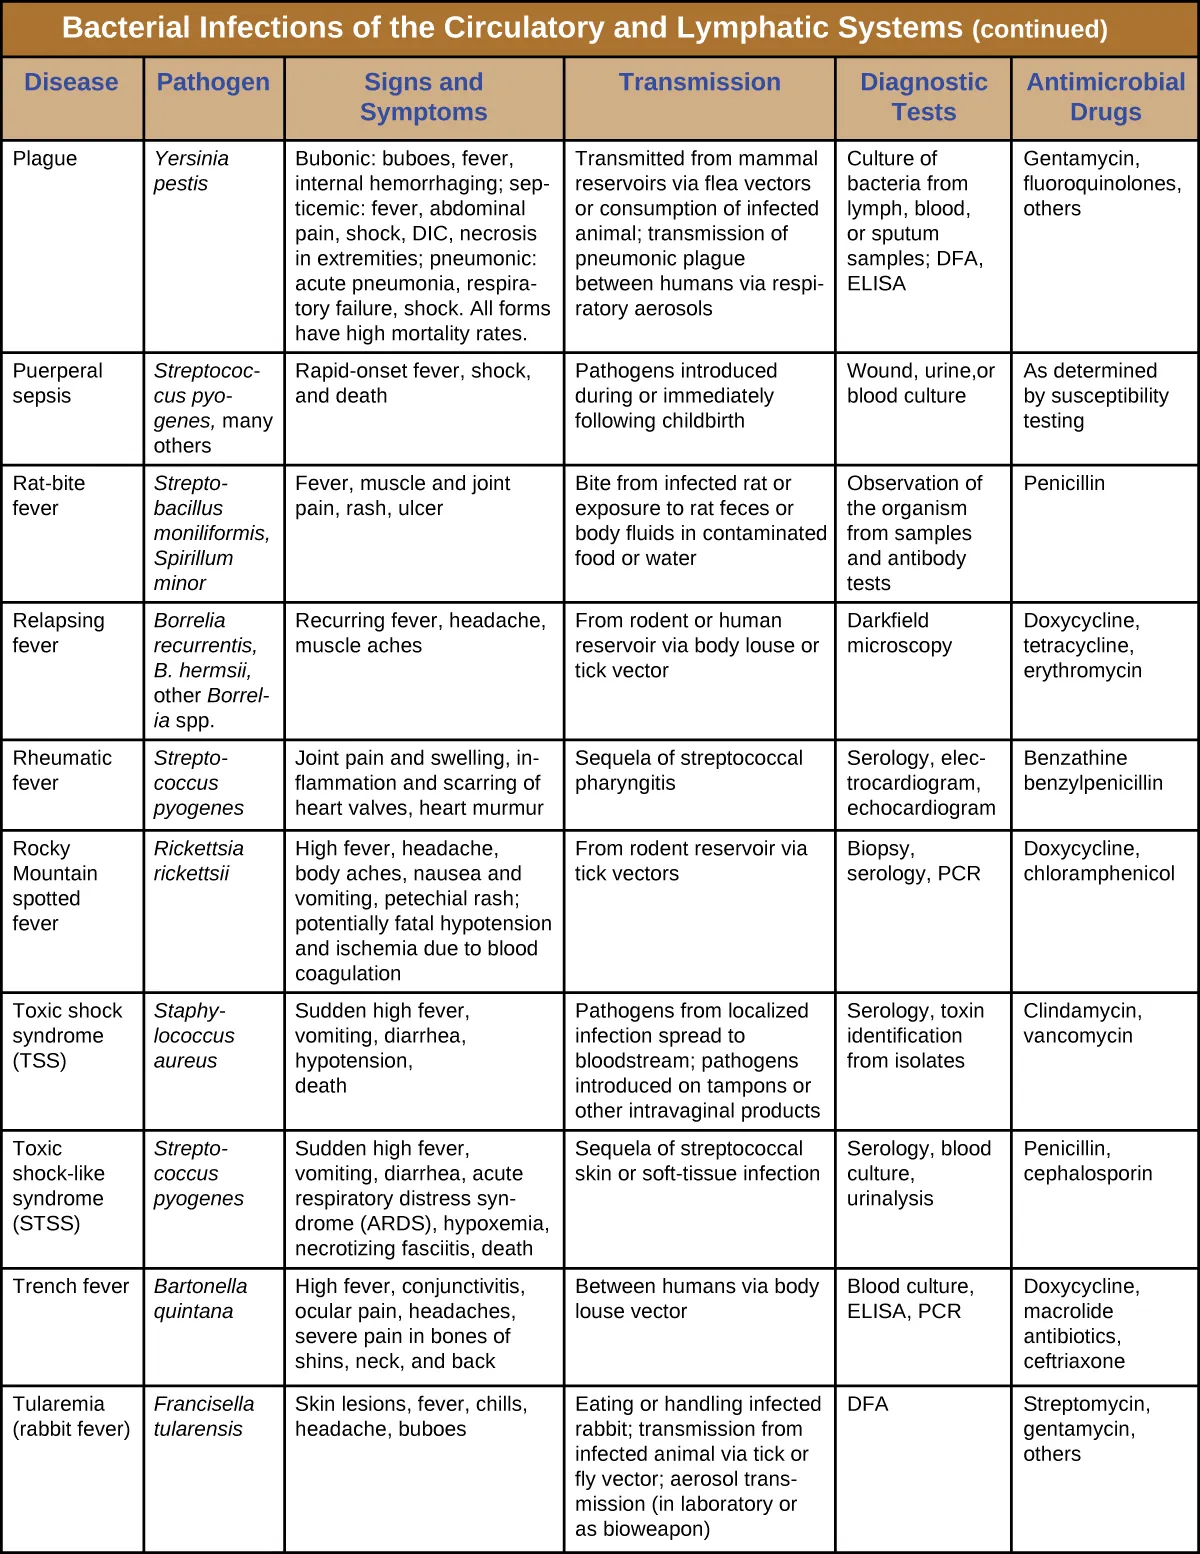 Table titled: Bacterial Infections of the Circulatory and Lymphatic Systems (continued). Columns: Disease, Pathogen, Signs and Symptoms, Transmission, Diagnostic Tests, Antimicrobial Drugs.Plague; Yersinia pestis; Bubonic: buboes, fever, internal hemorrhaging; septicemic: fever, abdominal pain, shock, DIC, necrosis in extremities; pneumonic: acute pneumonia, respiratory failure, shock. All forms have high mortality rates. Transmitted from mammal reservoirs via flea vectors or consumption of infected animal; transmission of pneumonic plague between humans via respiratory aerosols; Culture of bacteria from lymph, blood, or sputum samples; DFA, ELISA; Gentamycin, fluoroquinolones, others. Puerperal sepsis; Streptococcus pyogenes, many others; Rapid-onset fever, shock, and death; Pathogens introduced during or immediately following childbirth; Wound, urine, or blood culture; As determined by susceptibility testing. Rat-bite fever; Streptobacillus moniliformis, Spirillum minor; Fever, muscle and joint pain, rash, ulcer; Bite from infected rat or exposure to rat feces or body fluids in contaminated food or water; Observation of the organism from samples and antibody tests; Penicillin. Relapsing fever; Borrelia recurrentis, B. hermsii, other Borrelia spp.; Recurring fever, headache, muscle aches; From rodent or human reservoir via body louse or tick vector; Darkfield microscopy; Doxycycline, tetracycline, erythromycin. Rheumatic fever; Streptococcus pyogenes; Joint pain and swelling, inflammation and scarring of heart valves, heart murmur; Sequela of streptococcal pharyngitis; Serology, electrocardiogram, echocardiogram; Benzathine benzylpenicillin. Rocky Mountain spotted fever; Rickettsia rickettsia; High fever, headache, body aches, nausea and vomiting, petechial rash; potentially fatal hypotension and ischemia due to blood coagulation; From rodent reservoir via tick vectors; Biopsy, serology, PCR; Doxycycline, chloramphenicol. Toxic shock syndrome (TSS); Staphylococcus aureus; Sudden high fever, vomiting, diarrhea, hypotension, deathPathogens from localized infection spread to bloodstream; pathogens introduced on tampons or other intravaginal products; Serology, toxin identification from isolates; Clindamycin, vancomycin. Toxic shock-like syndrome (STSS); Streptococcus pyogenes; Sudden high fever, vomiting, diarrhea, acute respiratory distress syndrome (ARDS), hypoxemia, necrotizing fasciitis, death; Sequela of streptococcal skin or soft-tissue infection; [MISSING]; Penicillin, cephalosporin. Trench fever; Bartonella Quintana; High fever, conjunctivitis, ocular pain, headaches, severe pain in bones of shins, neck, and back; Between humans via body louse vector; Blood culture, ELISA, PCR; Doxycycline, macrolide antibiotics, ceftriaxone. Tularemia (rabbit fever); Francisella tularensis Skin lesions, fever, chills, headache, buboes; Eating or handling infected rabbit; transmission from infected animal via tick or fly vector; aerosol transmission (in laboratory or as bioweapon); DFA; Streptomycin, gentamycin, others.